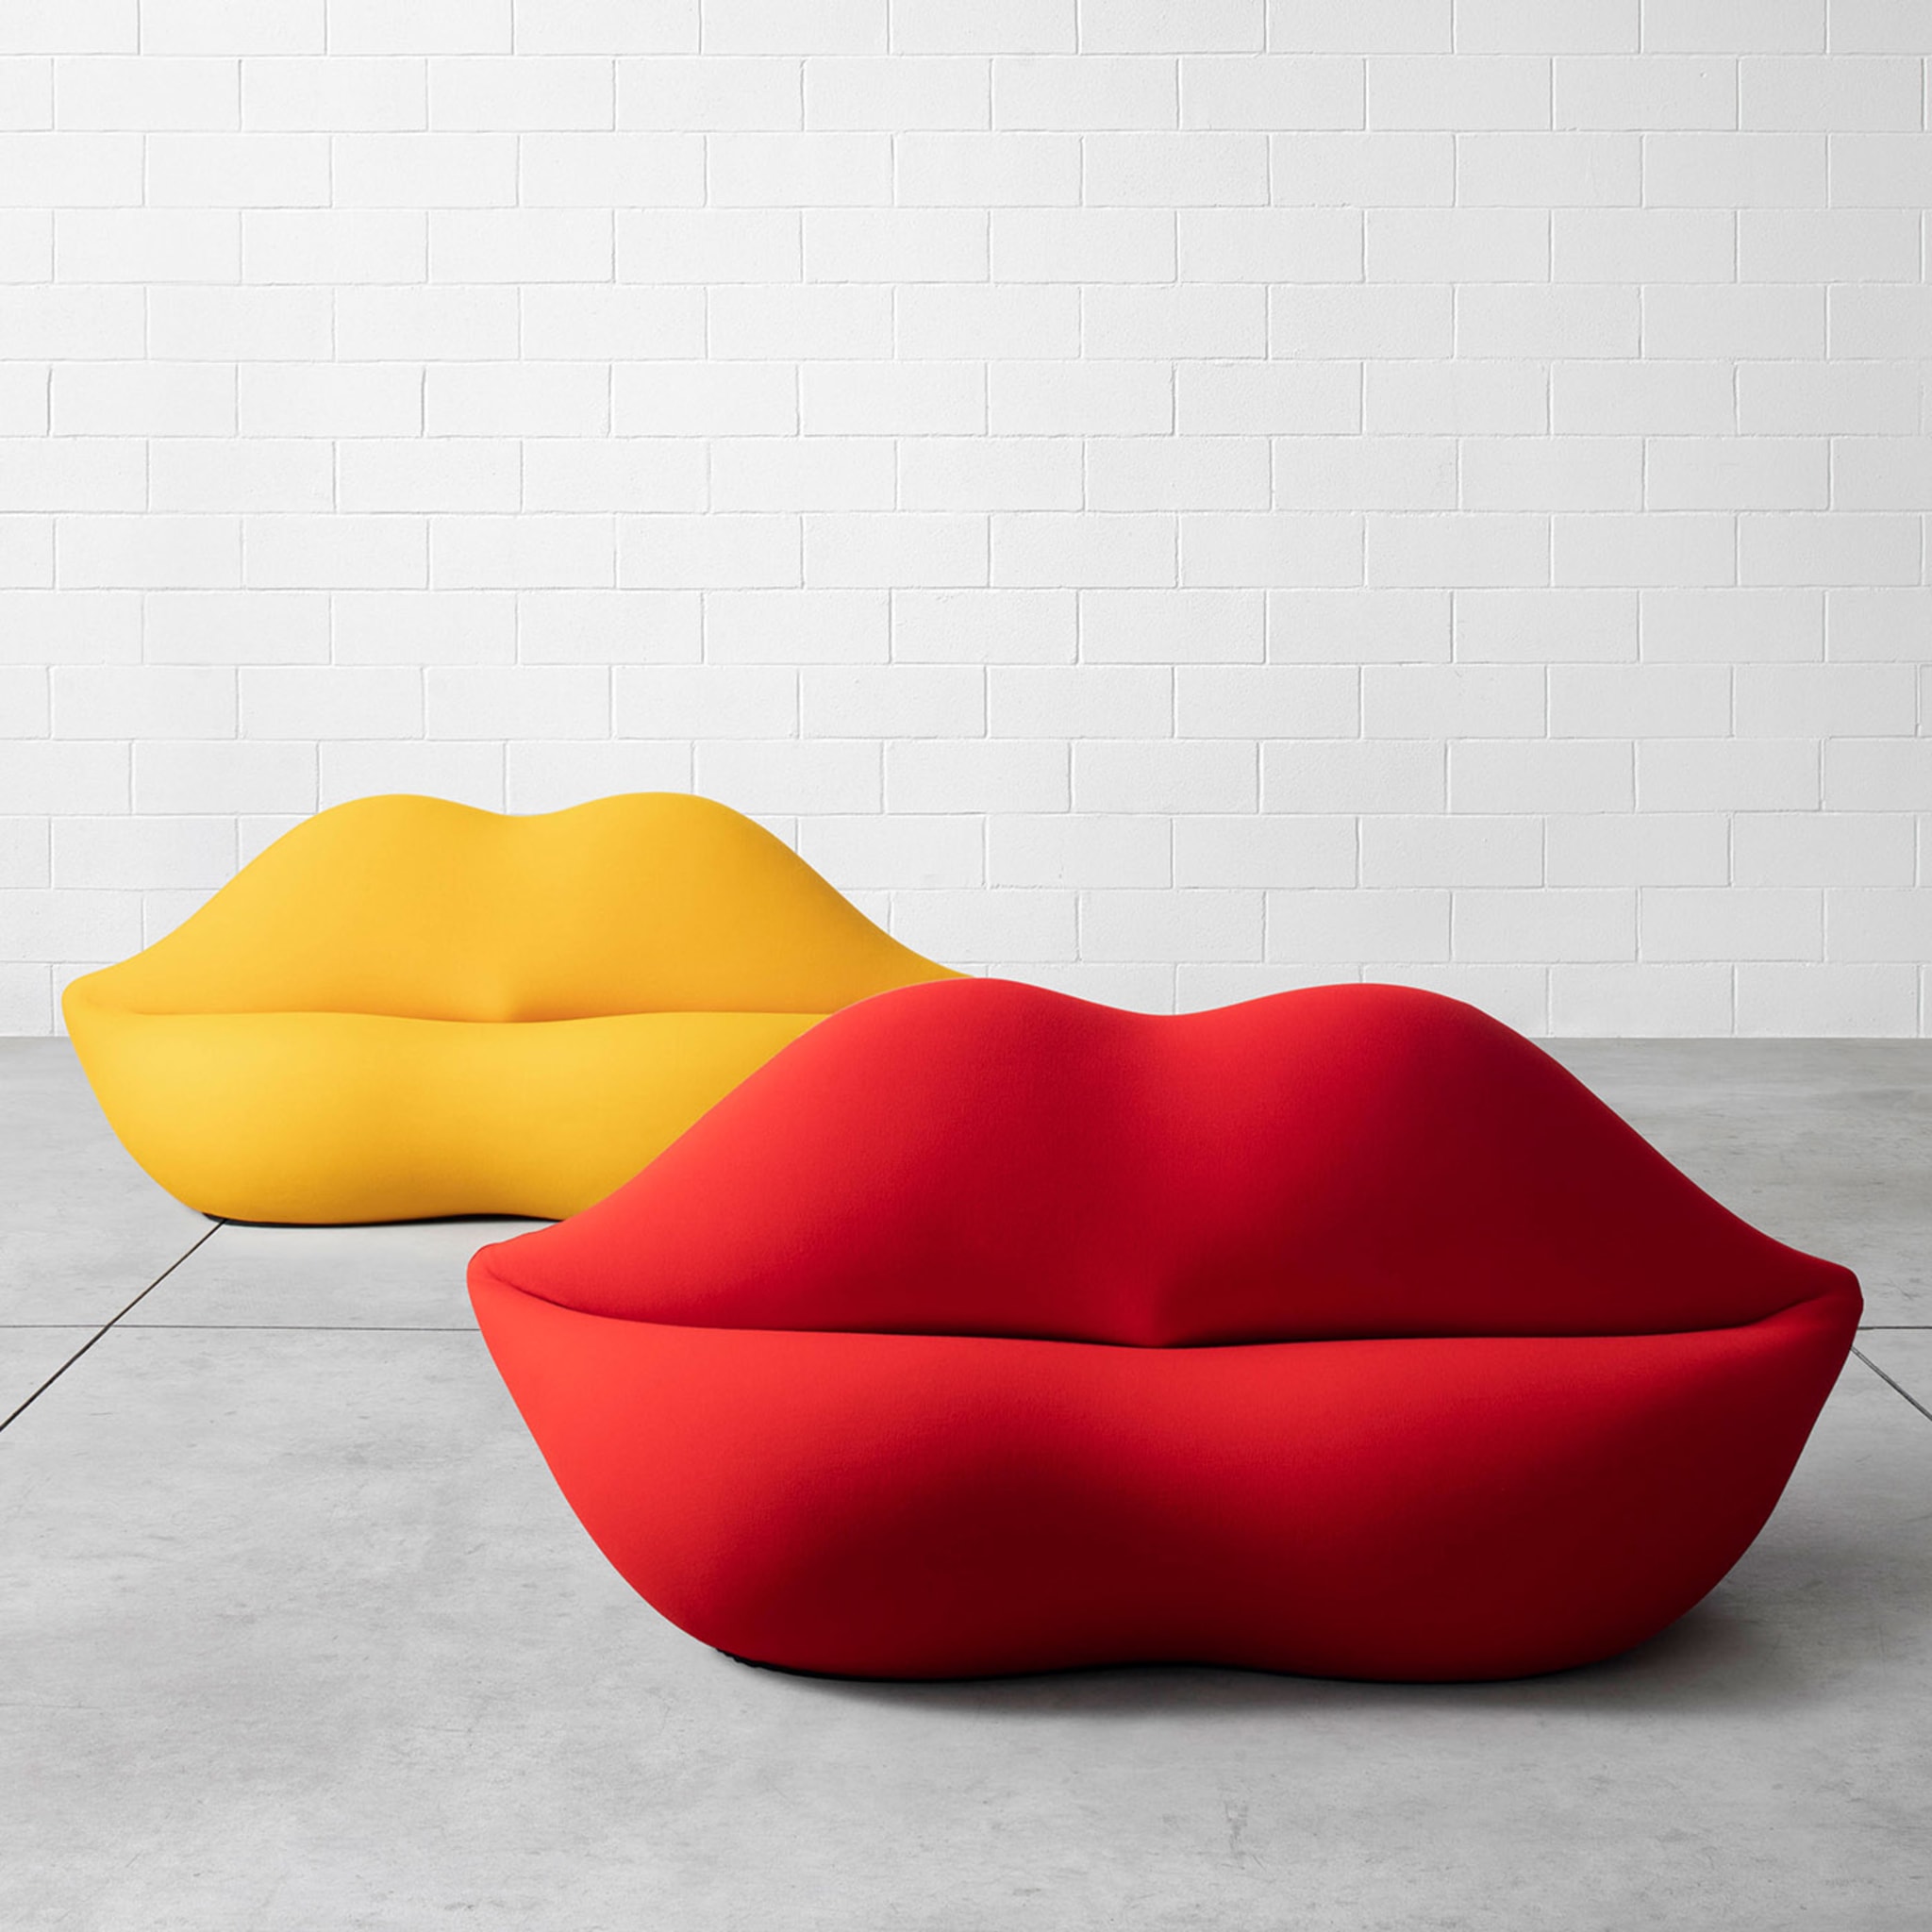 Bocca Red Limited Edition Sofa by Studio 65 - Alternative view 1